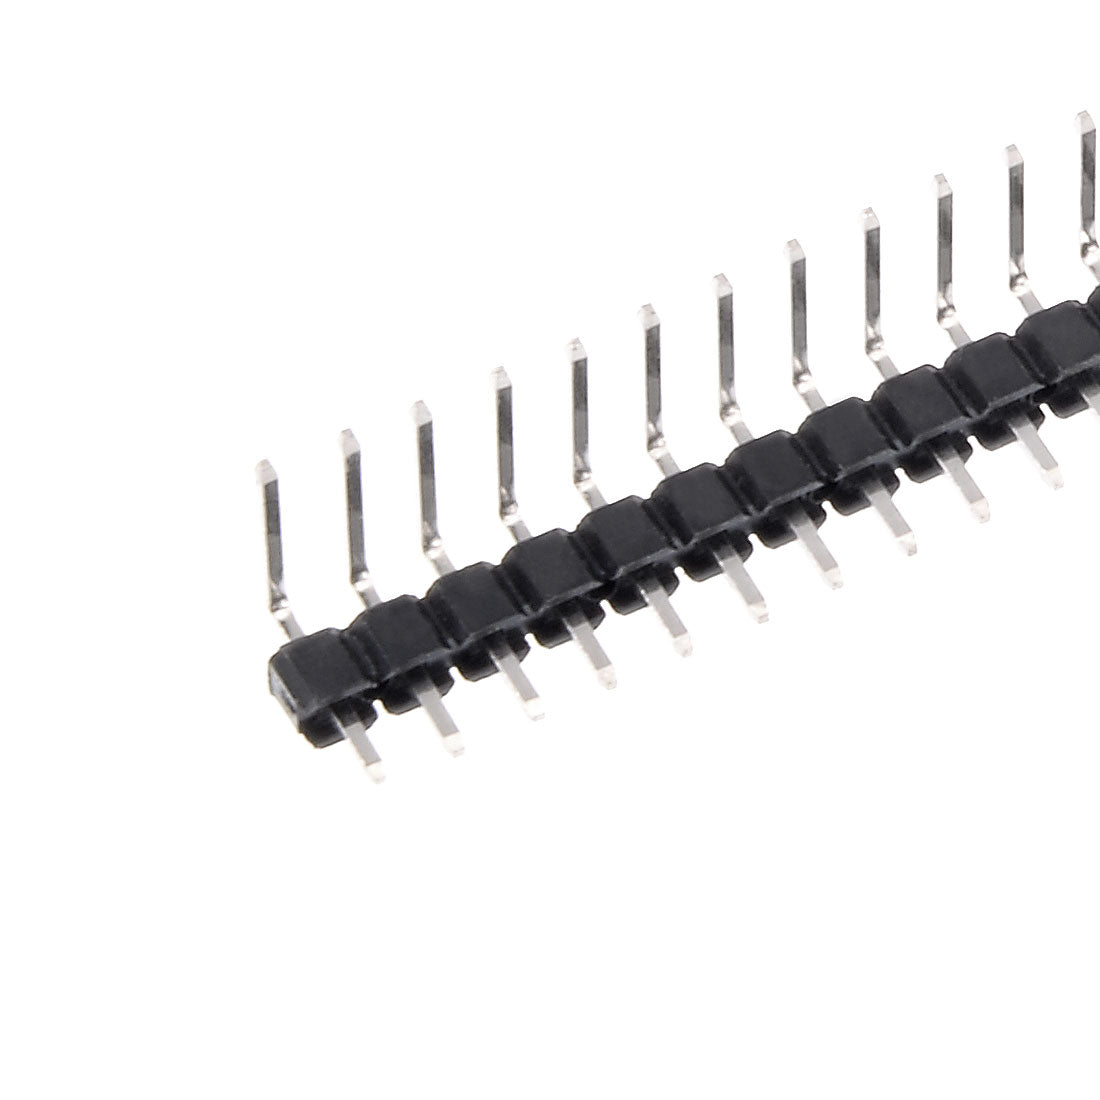 uxcell Uxcell 20Pcs 2.54mm Pitch 40P Single Row Curved Connector Pin Header Strip for Arduino Prototype Shield